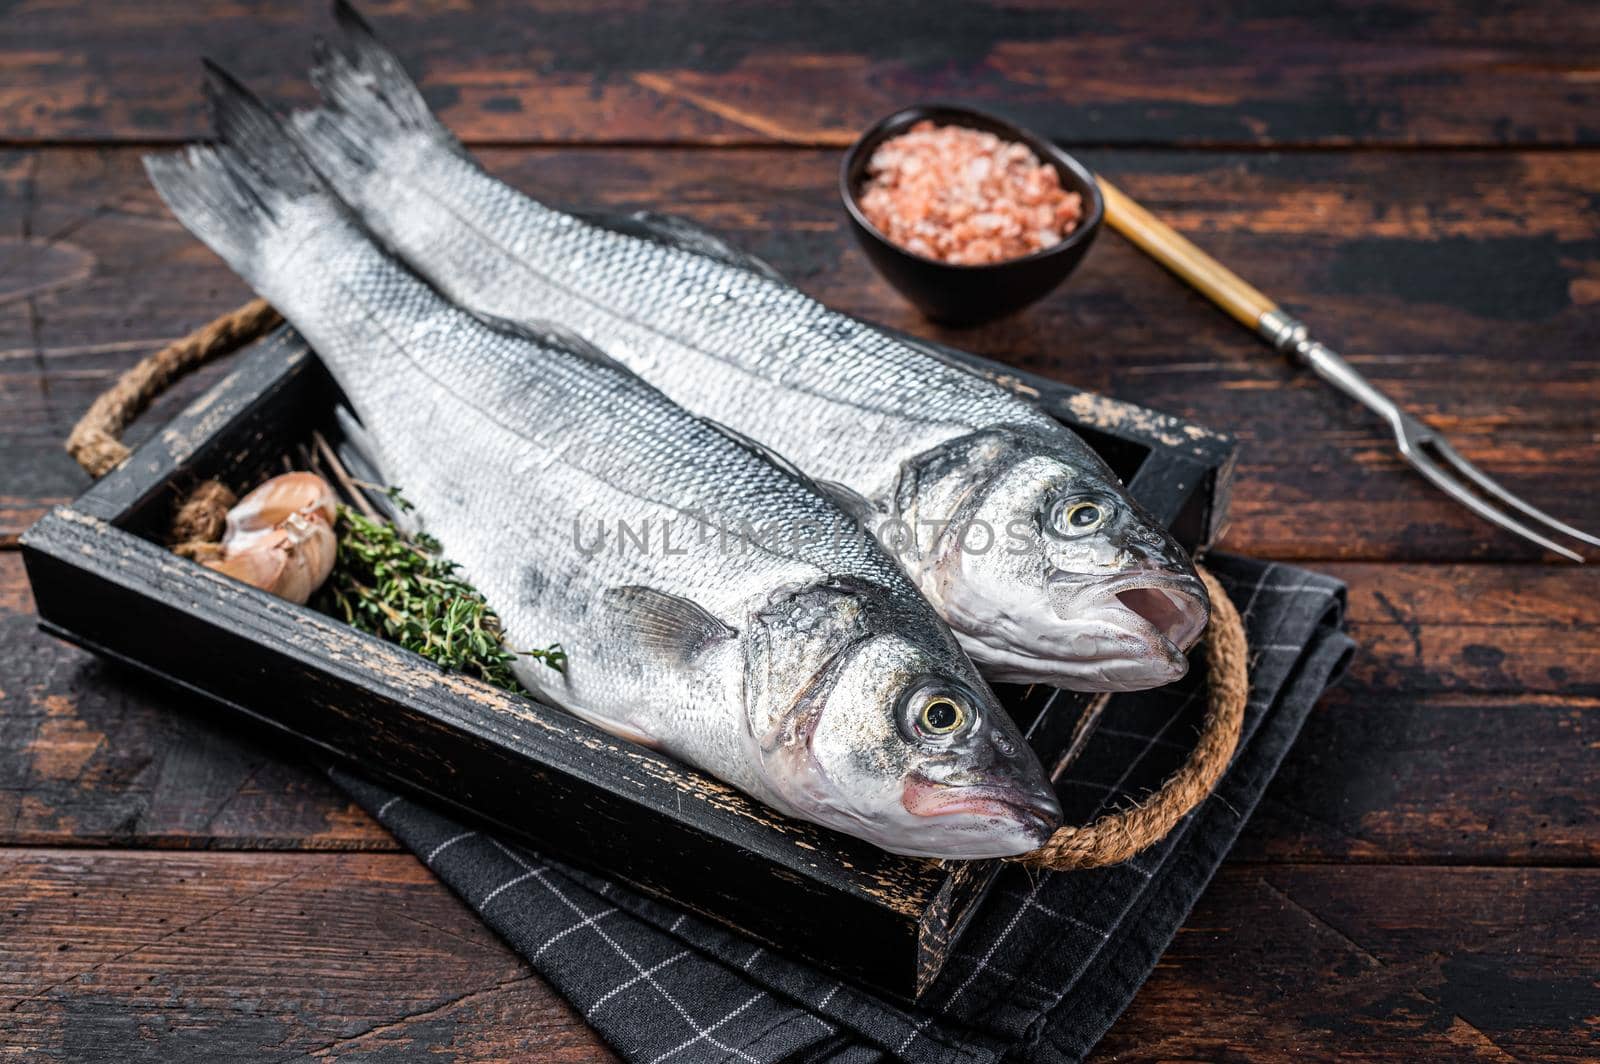 Seabass or sea bass raw fish in a wooden tray with herbs. Dark wooden background. Top view by Composter